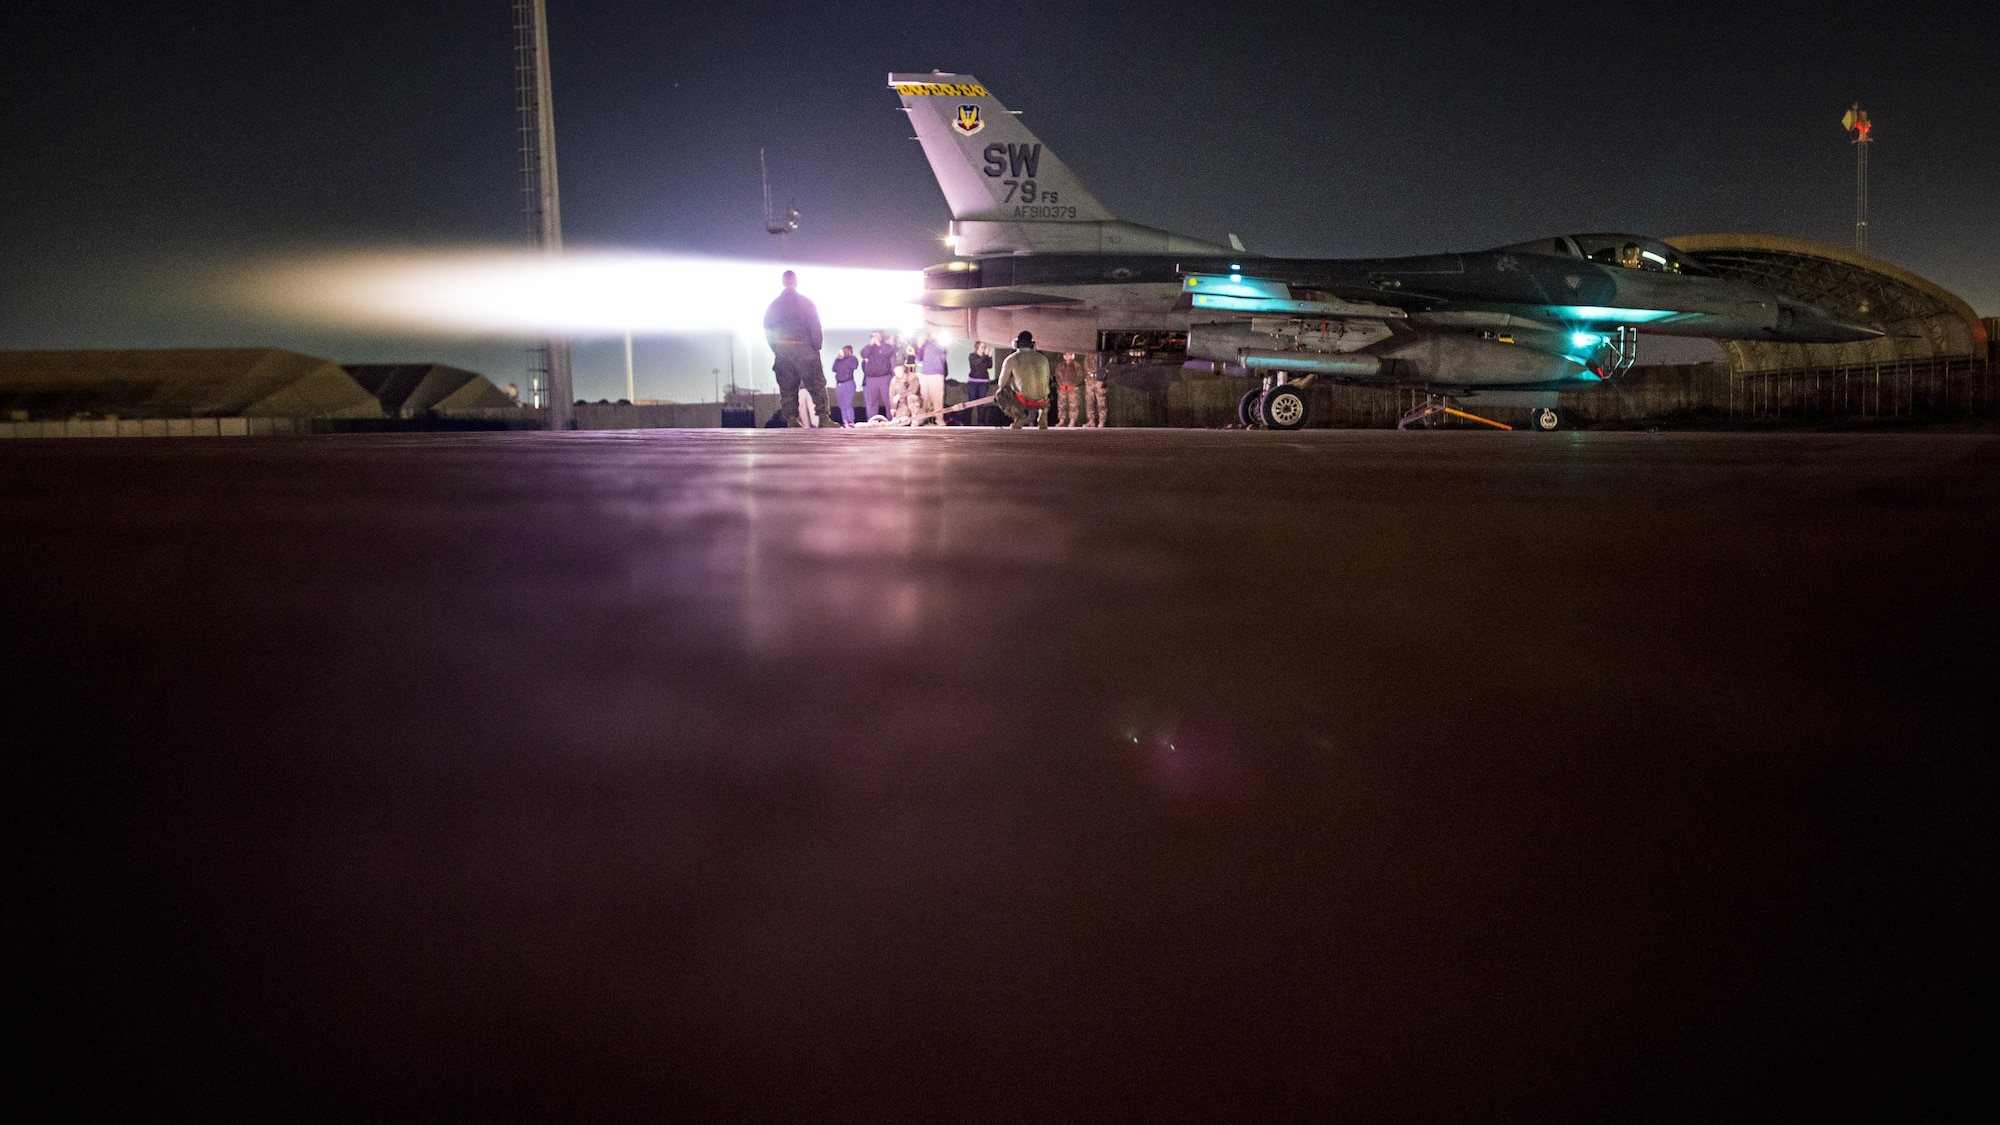 Staff Sgt. Erin Diaz and Senior Airmen Dakota Tabler and Logan Helle, 455th Expeditionary Maintenance Squadron engine technicians, conduct an augmentor operations check on an F-16 Fighting Falcon Dec. 4, 2016 at Bagram Airfield, Afghanistan. The operations check was conducted after installing a new engine component. (U.S. Air Force photo by Staff Sgt. Katherine Spessa)